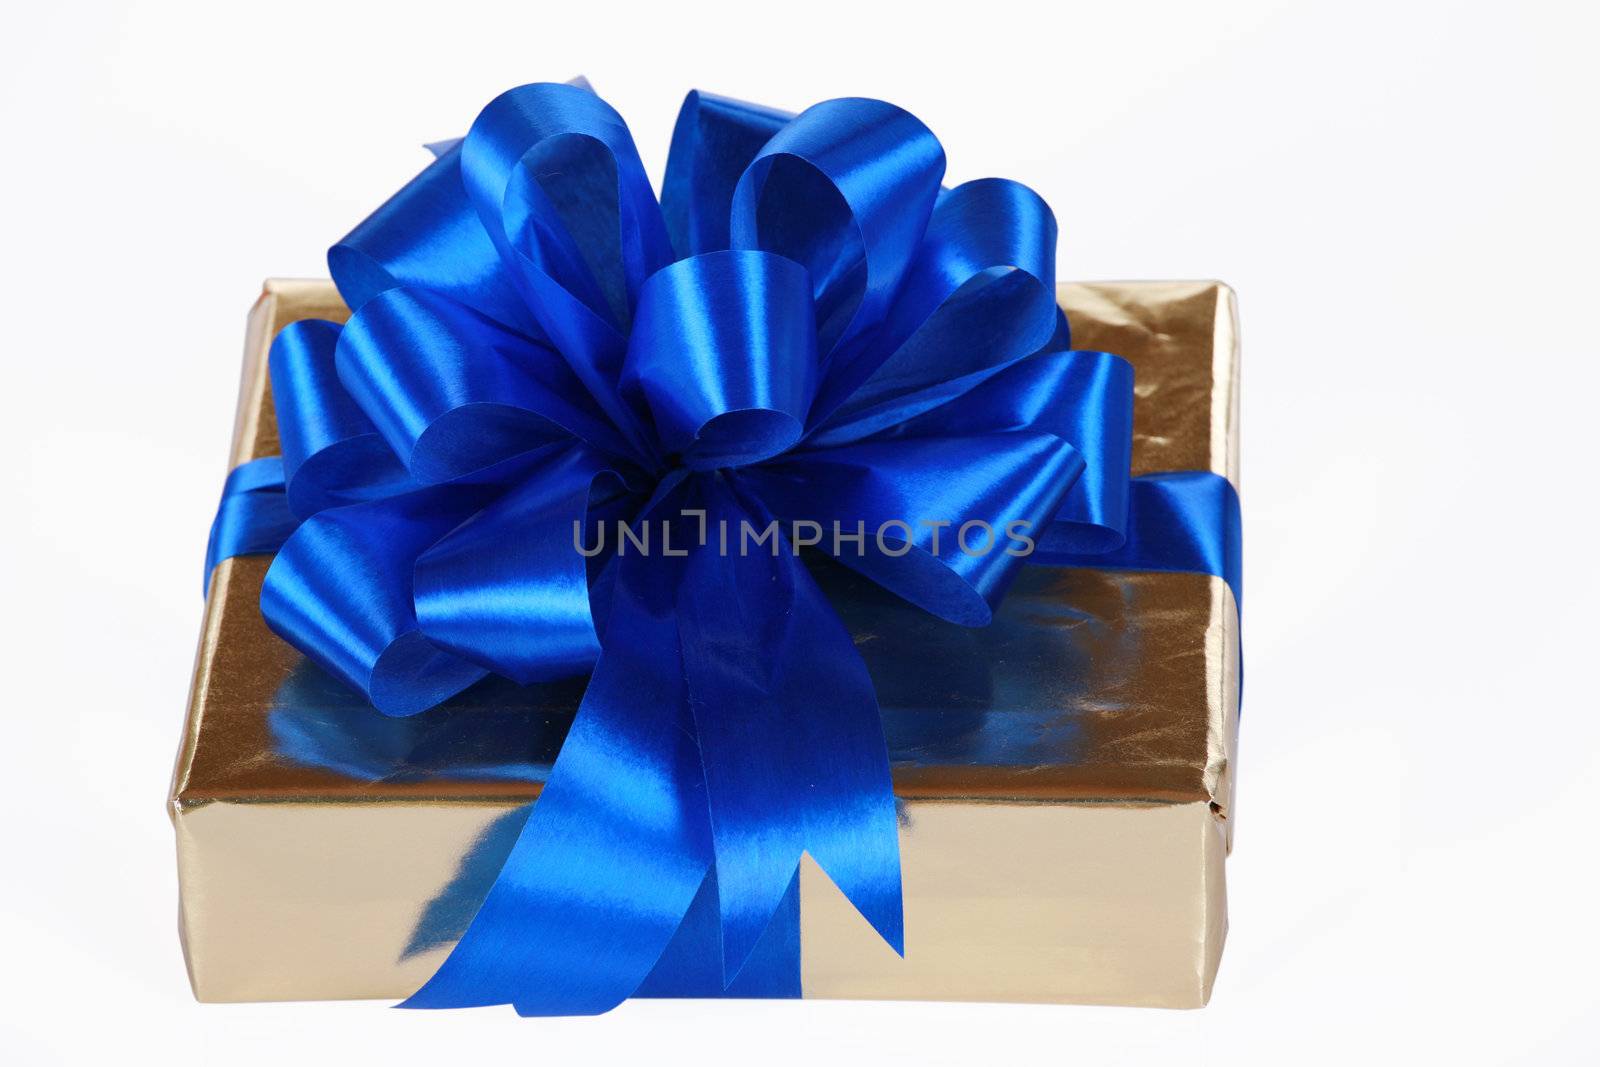 Gold present with blue ribbons and bow